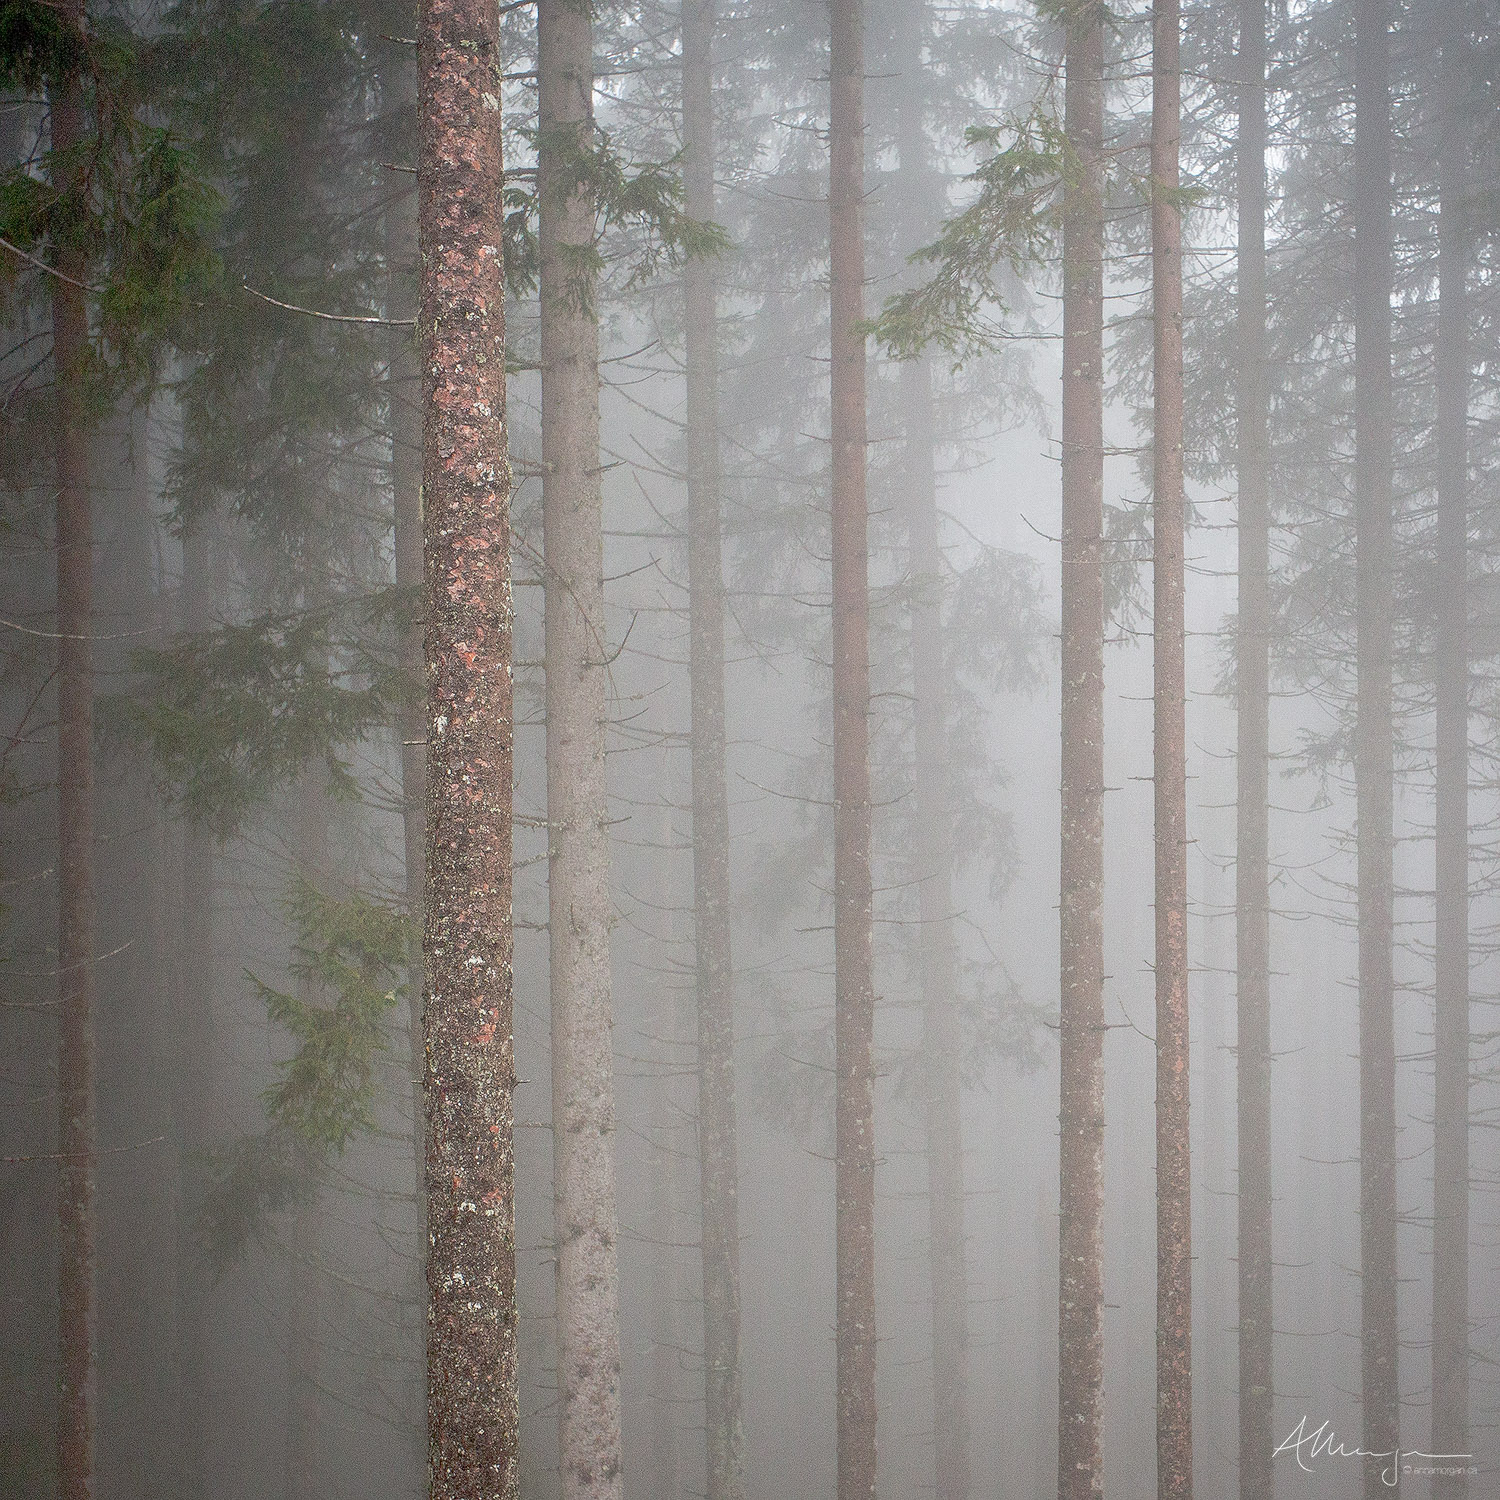 Vertical pine tree trunks in a heavy mist in the Dolomite, Italy.   